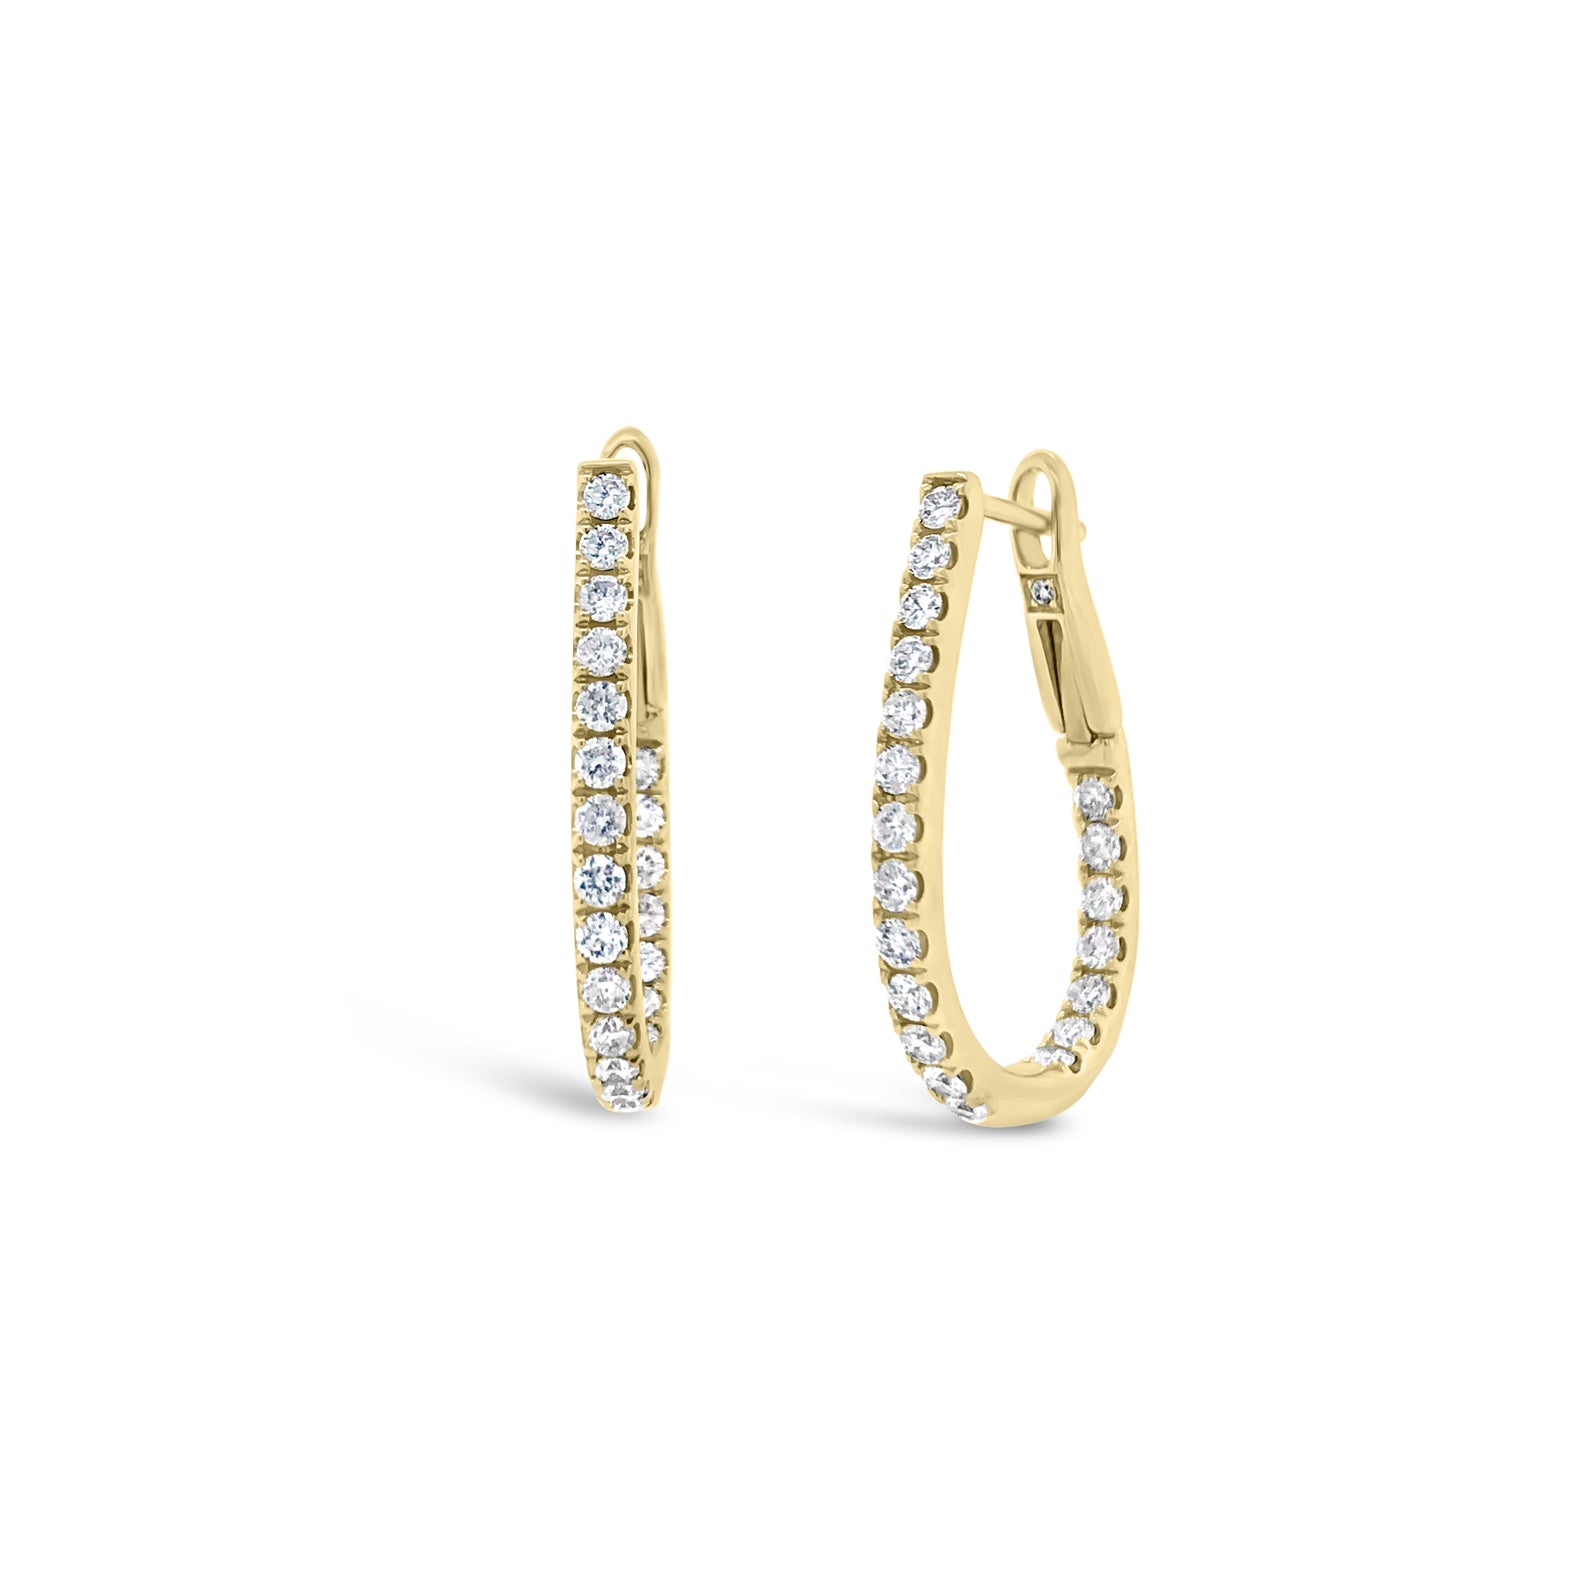 Inside-out diamond oval huggie earrings -18k gold weighing 3.91 grams  -44 round diamonds weighing .67 carats